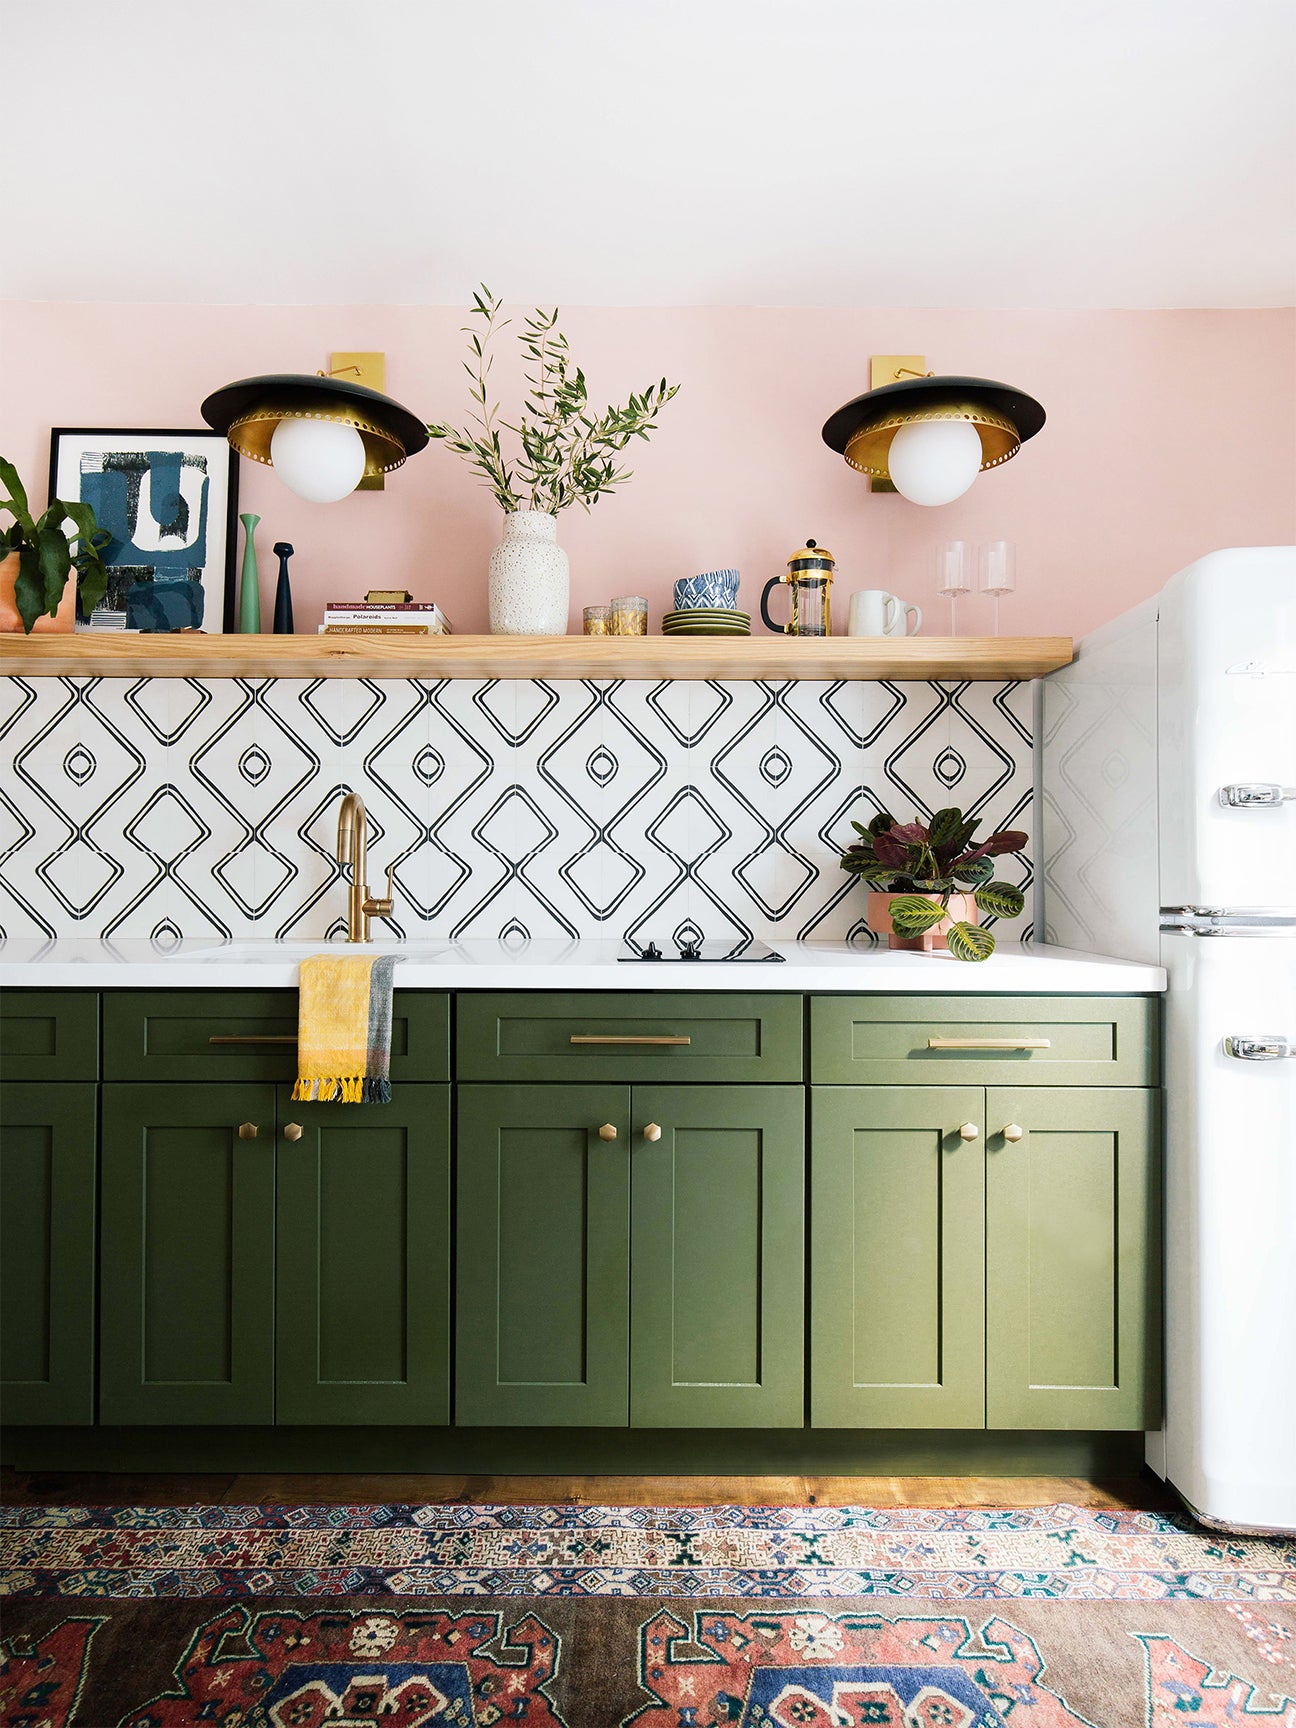 green kitchen cabinets with pink walls and black and white tile backs[lash